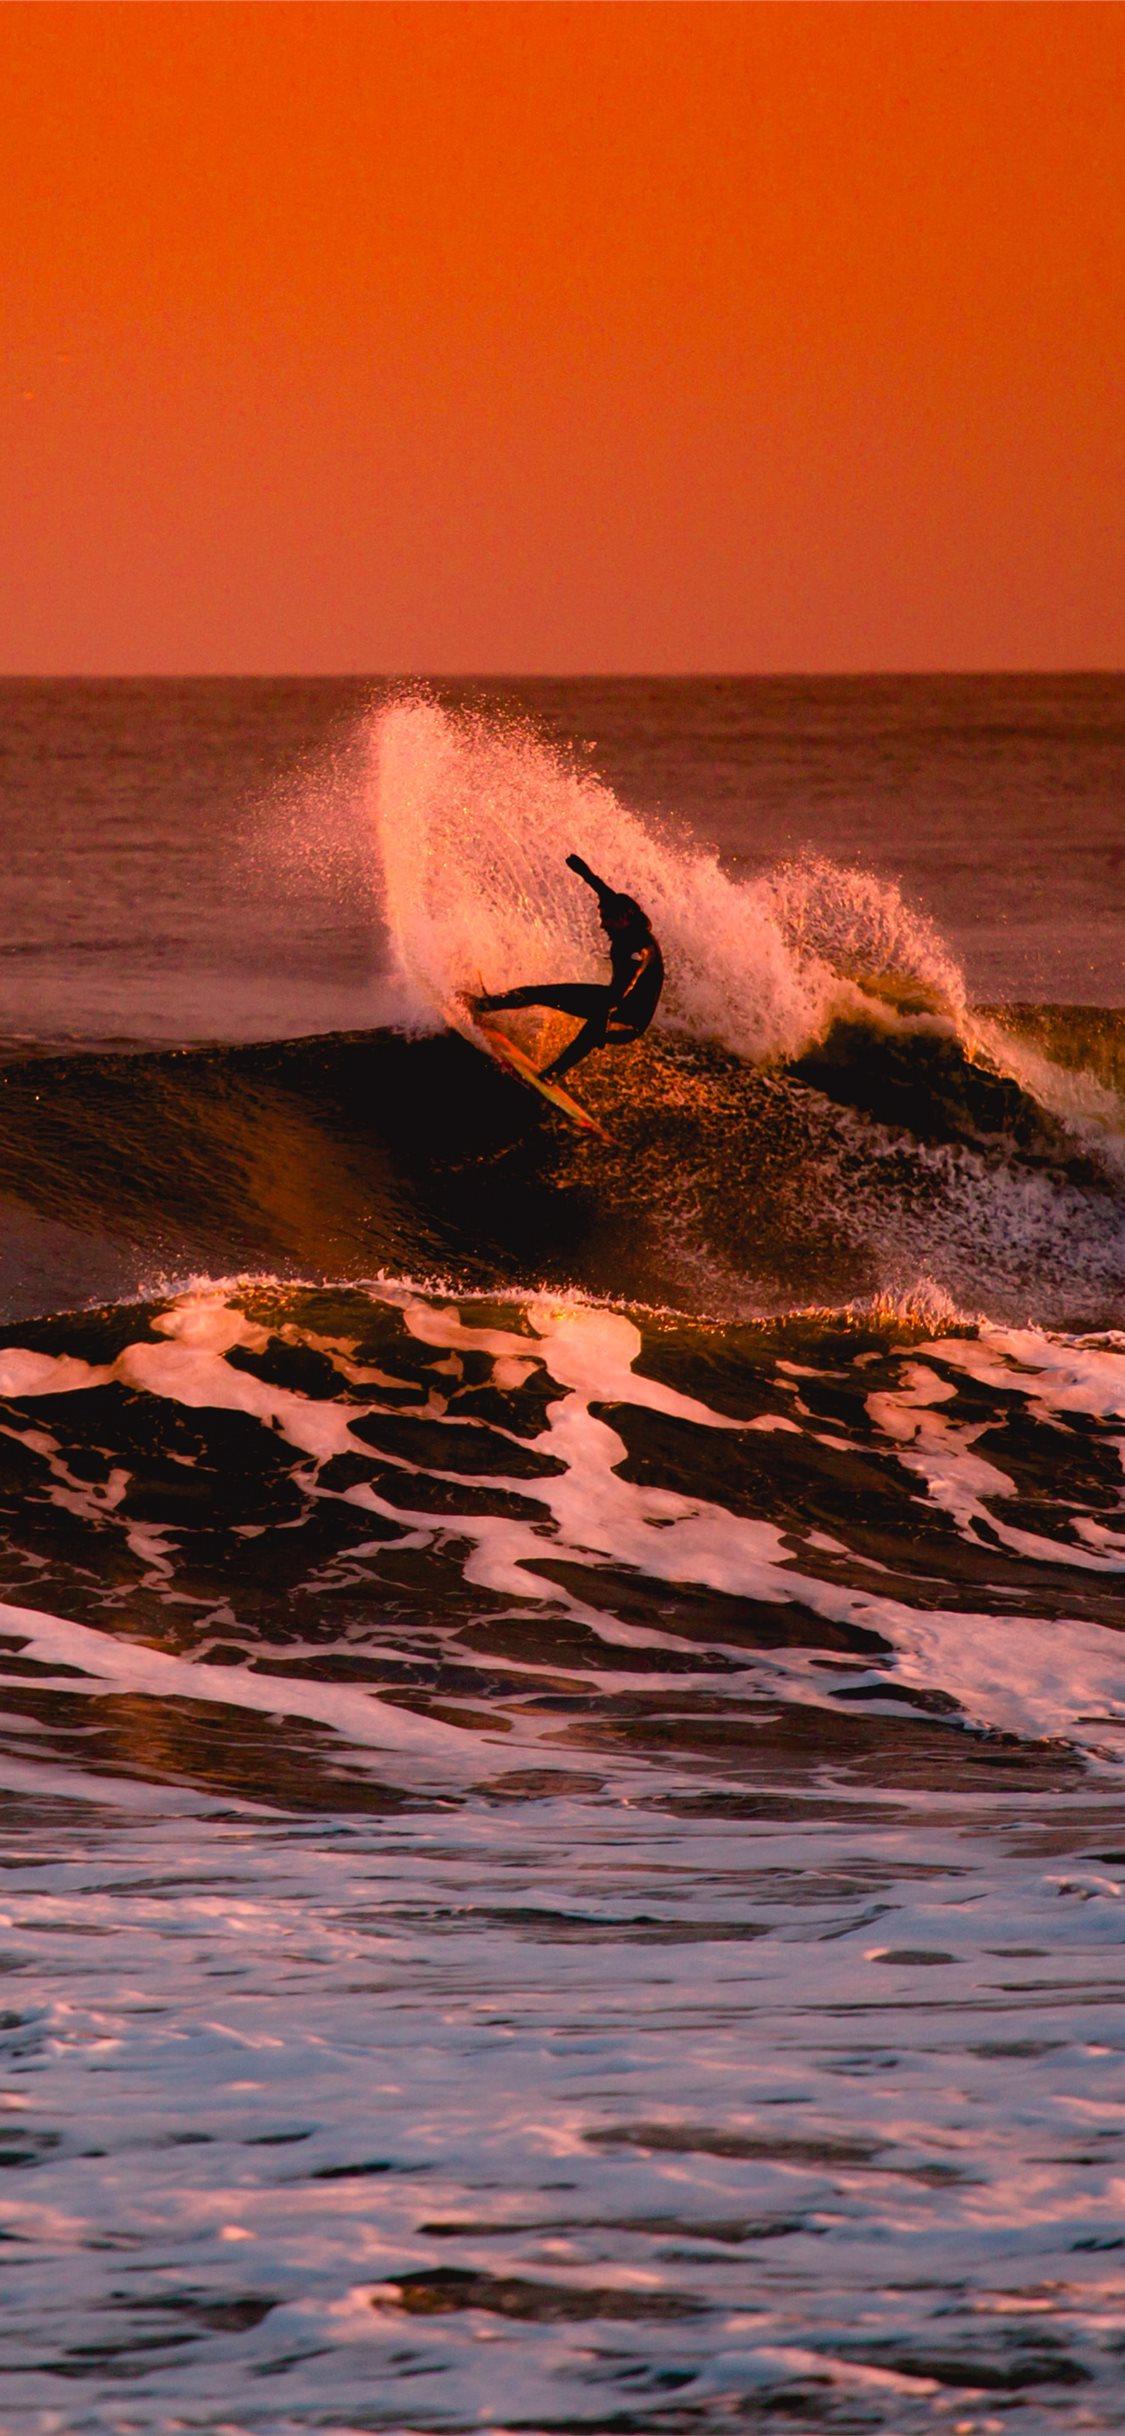 person surfing during sunset iPhone X Wallpaper Free Download